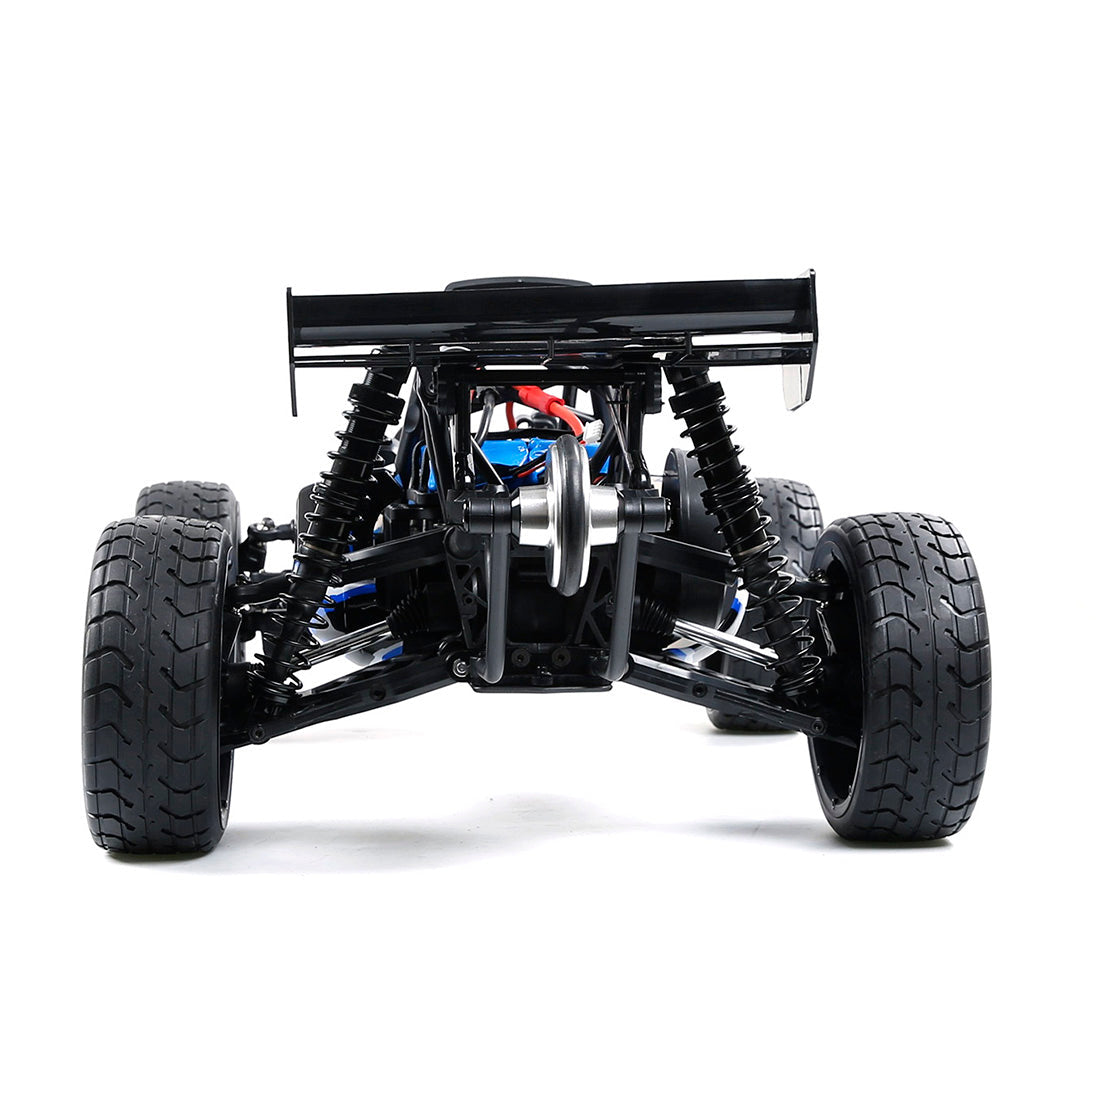 ROFUN EQ6 1/6 90+KM/H 2WD Rear Drive Brushless Off-road Vehicle 2.4G RC High Speed Model Car with Battery and Charger